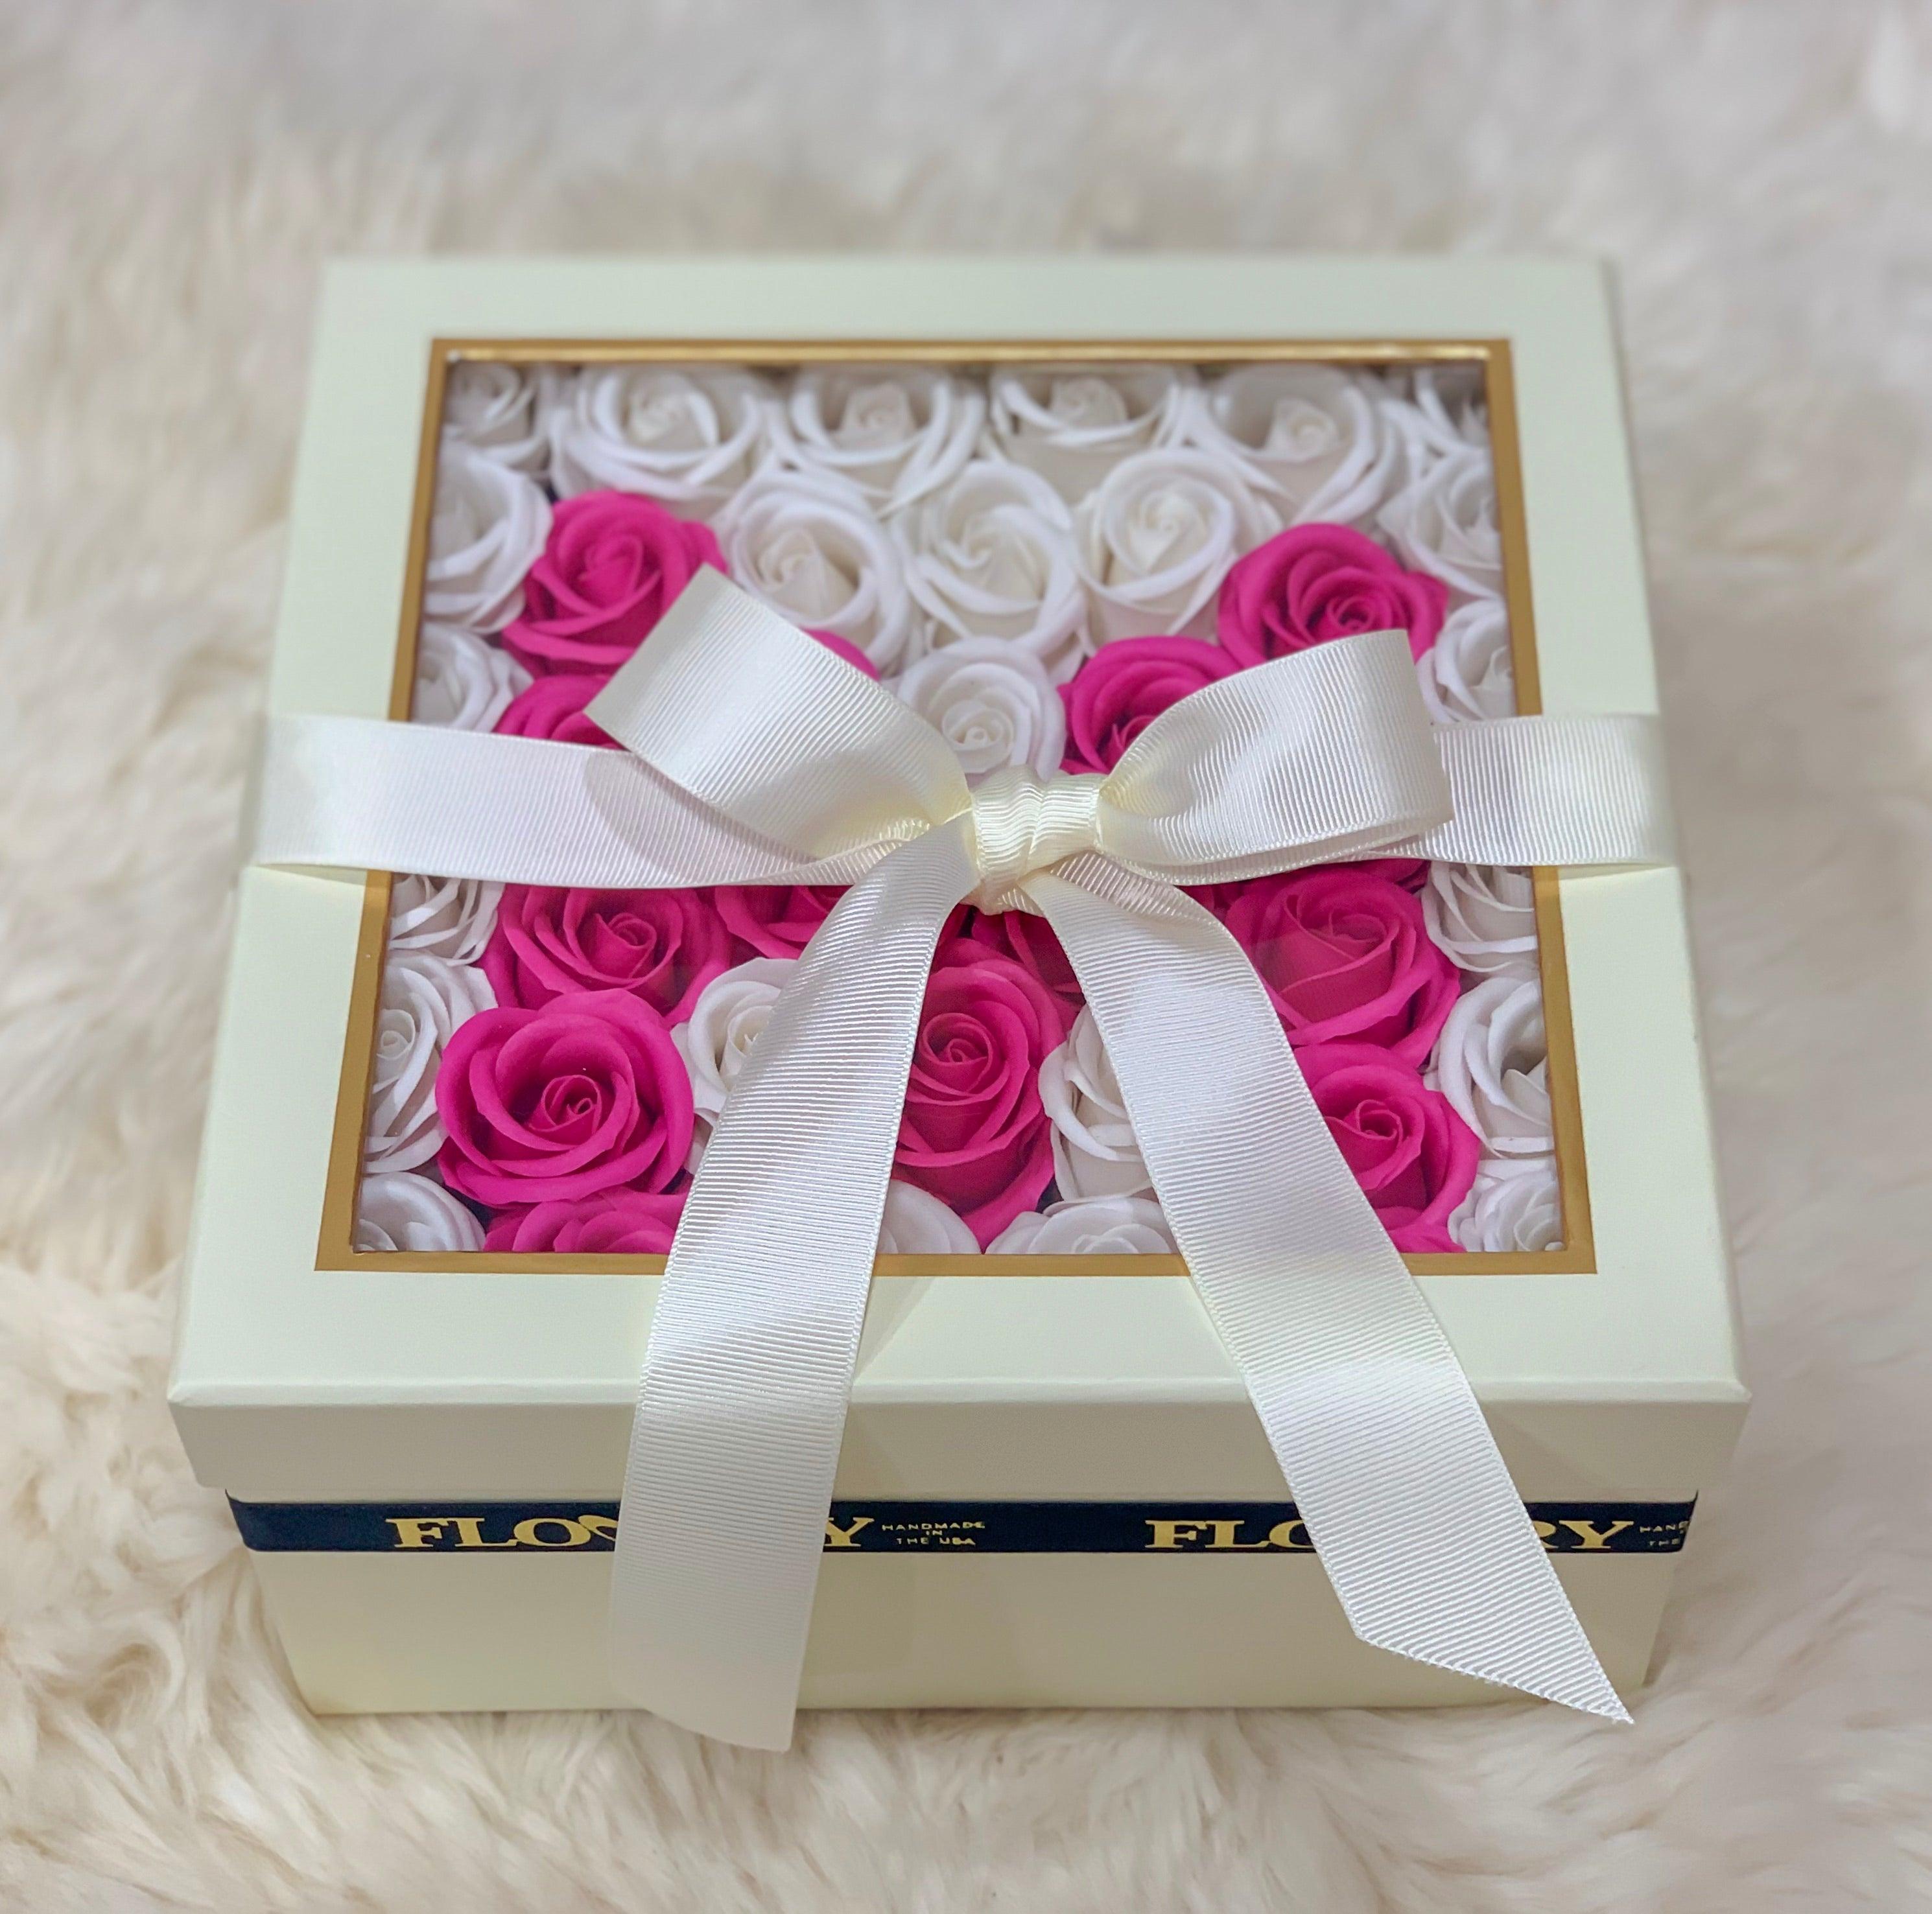 Large Heart Shape Box Flovery's Scented Soap Roses